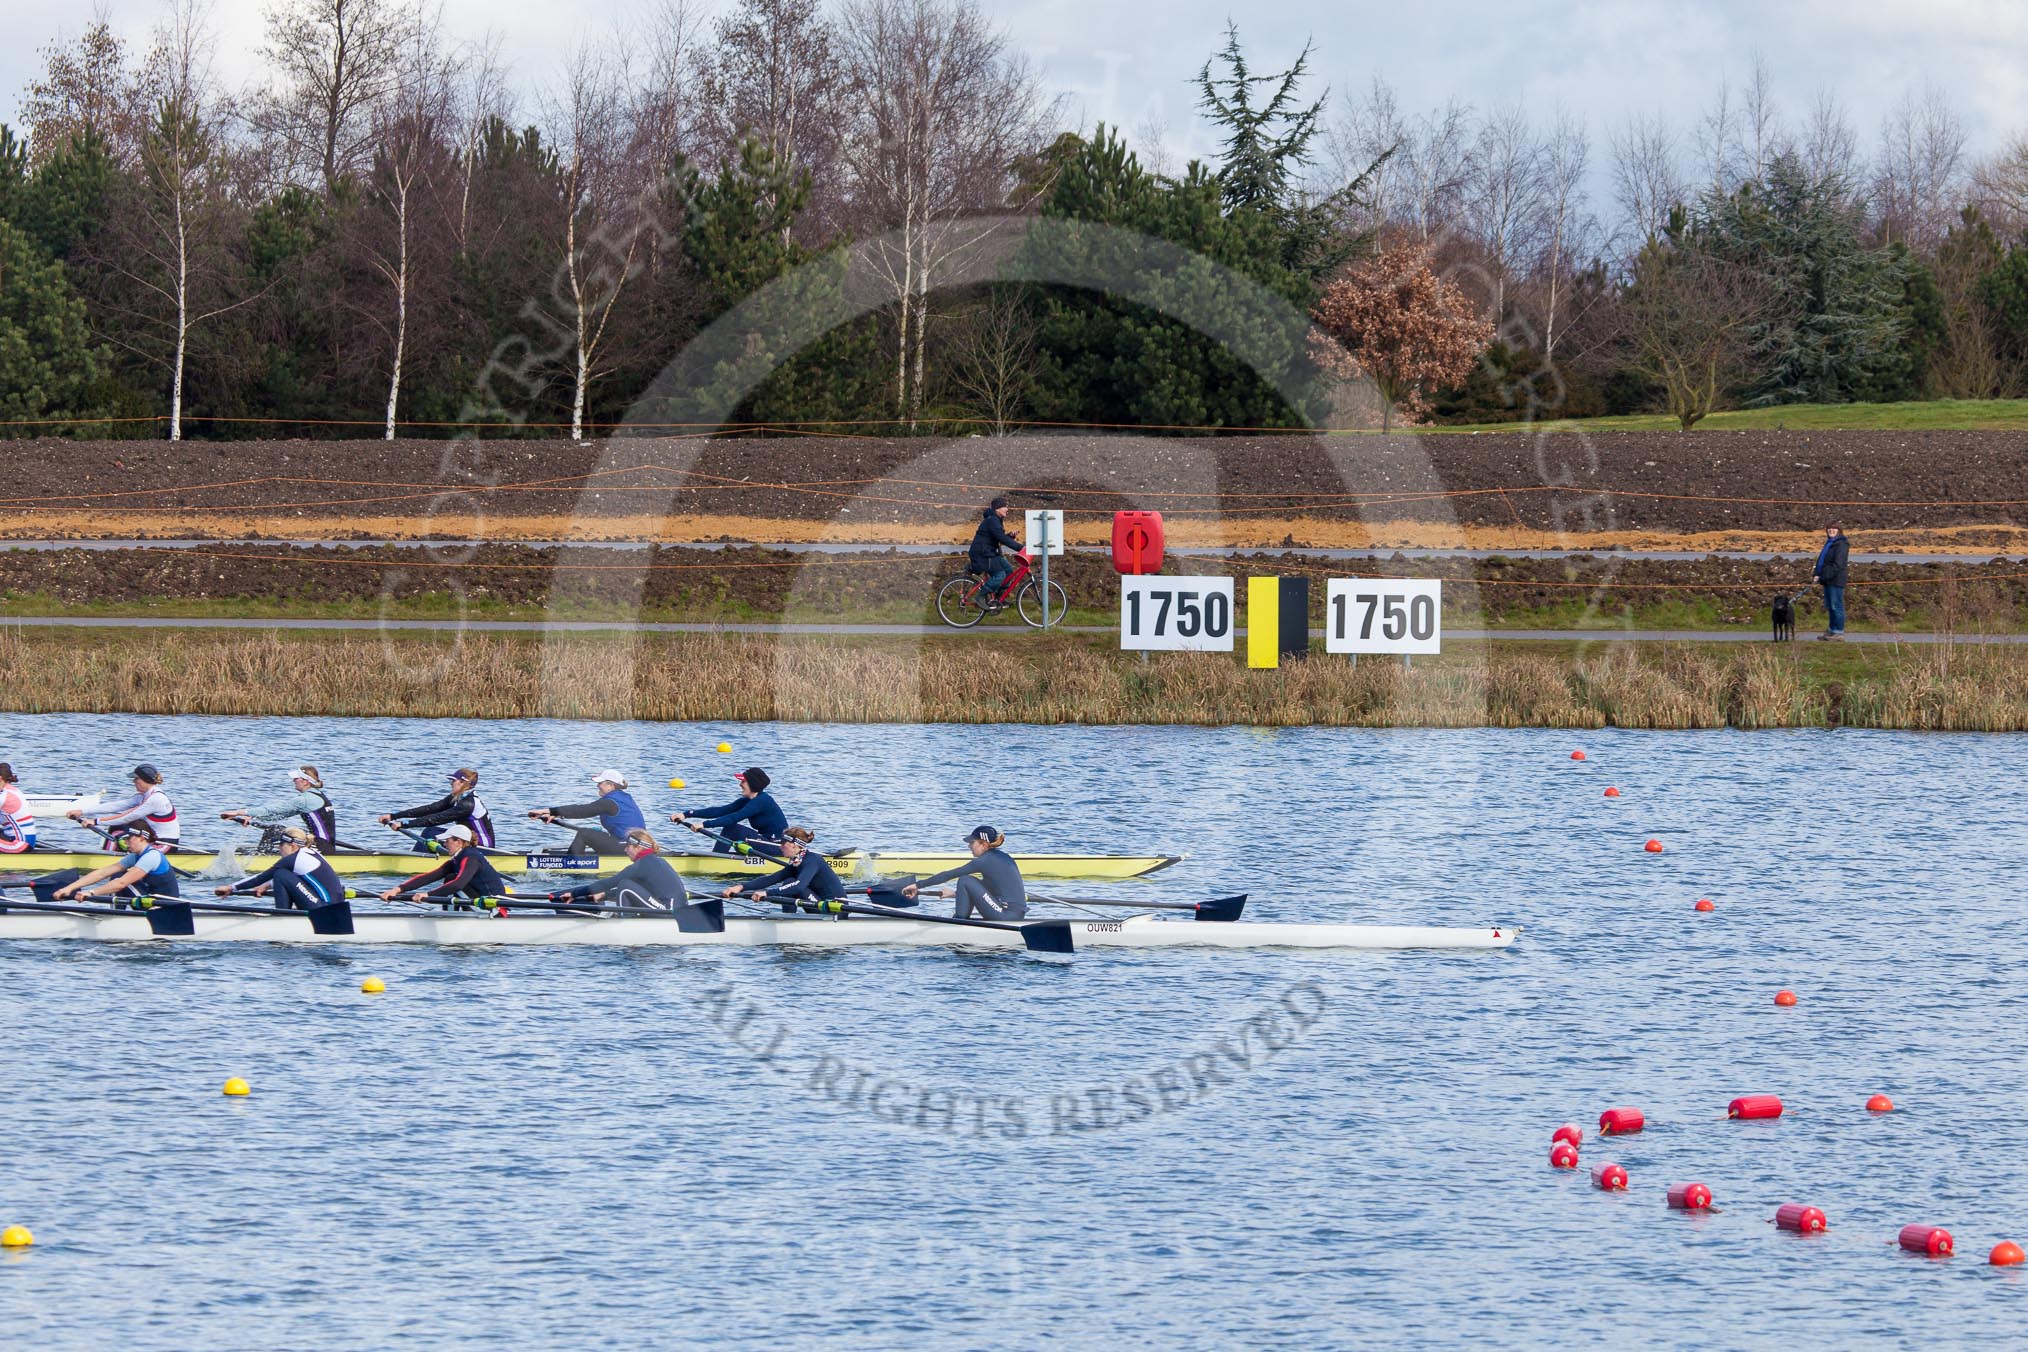 The Boat Race season 2013 - fixture OUWBC vs Olympians: The Olympians, in the yellow boat, racing the two OUWBC boats in a fixture at Dorney Lake. In front the Blue Boat, behind and half a length back the reserve boat Osiris..
Dorney Lake,
Dorney, Windsor,
Buckinghamshire,
United Kingdom,
on 16 March 2013 at 12:17, image #213